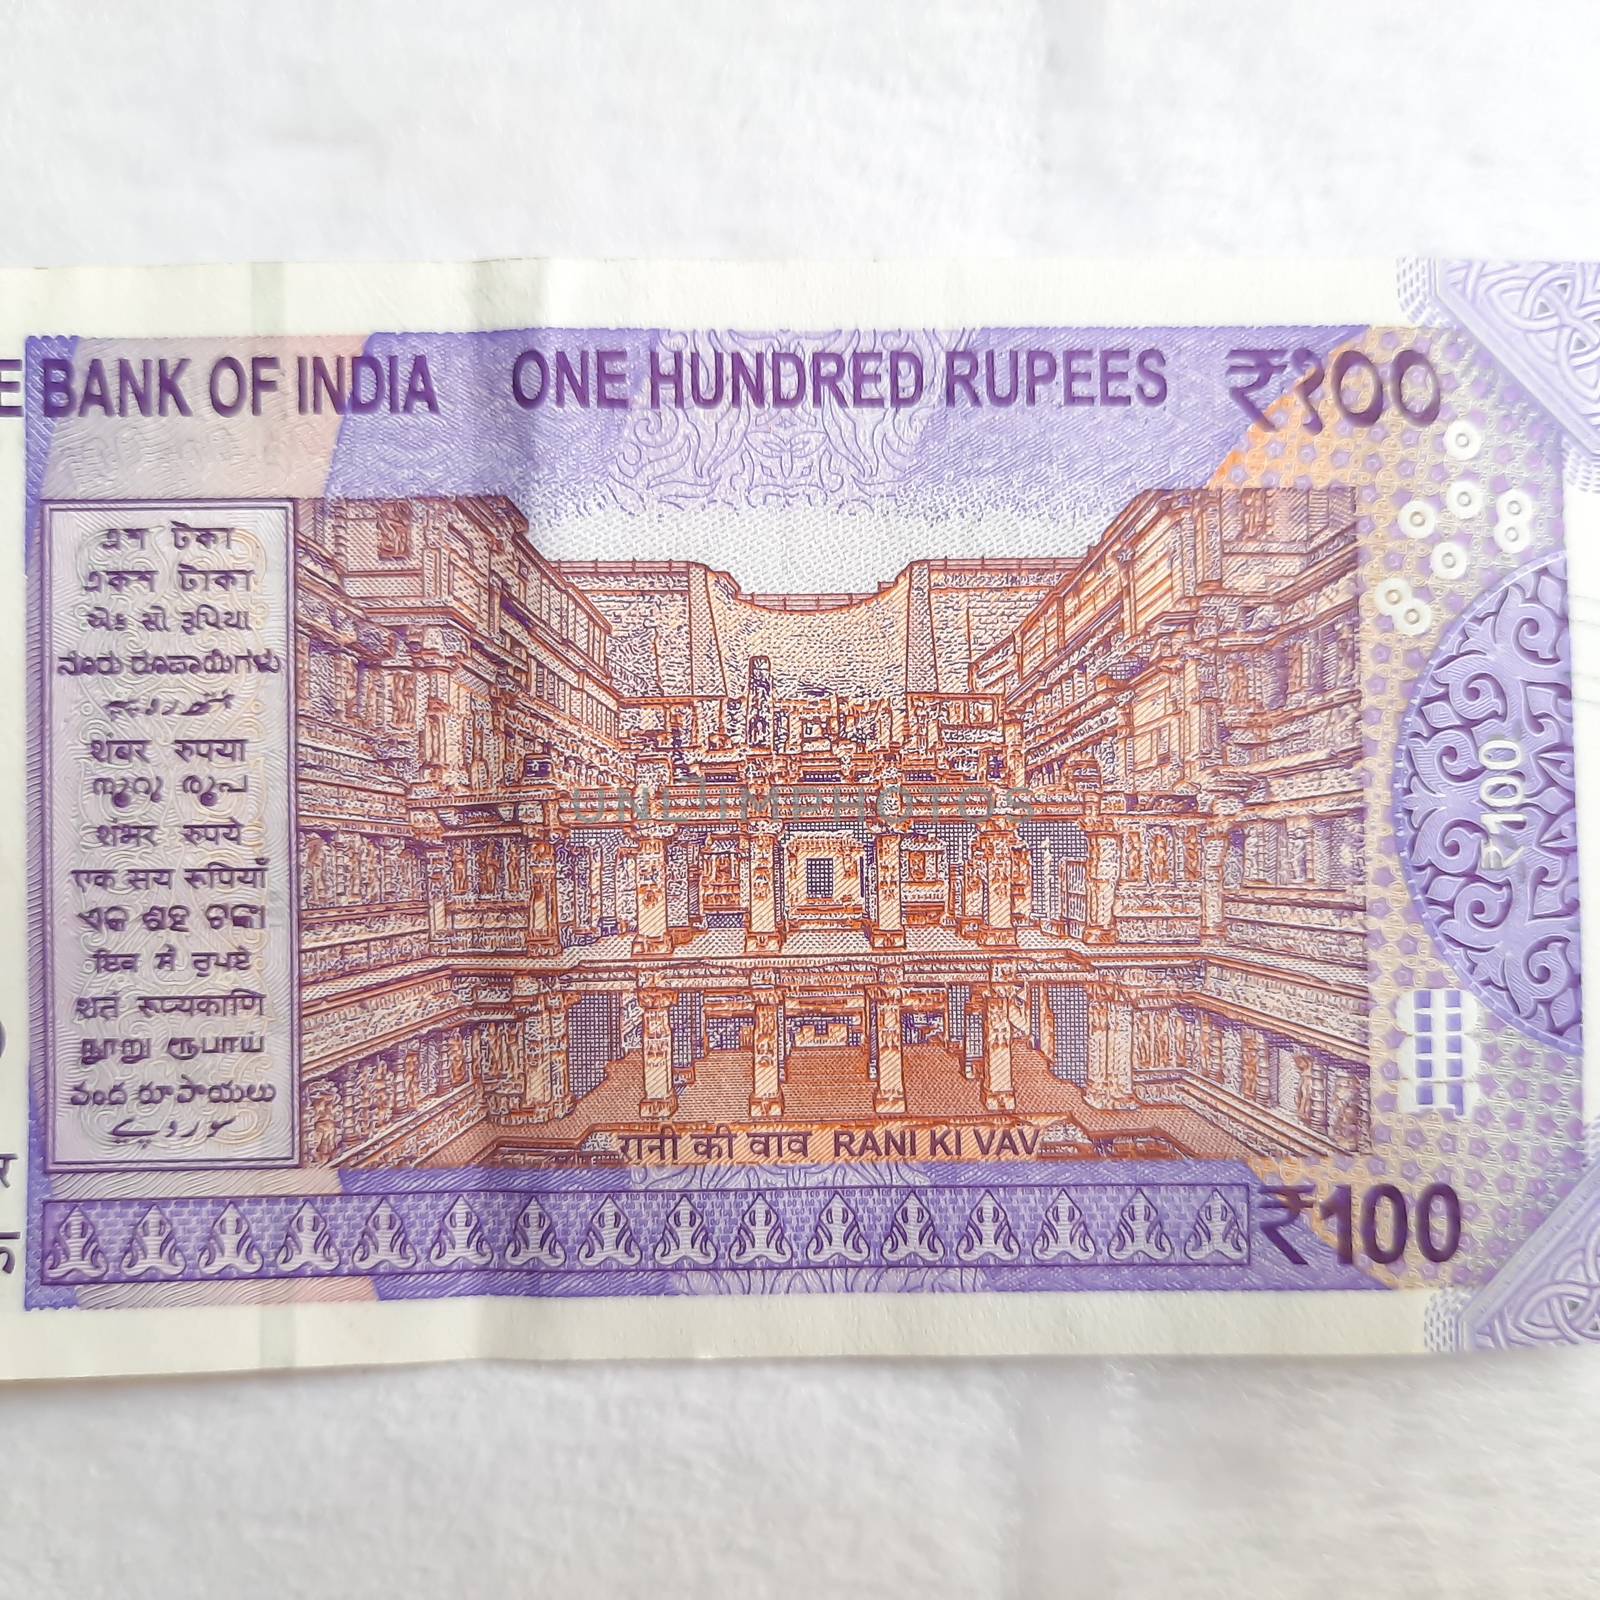 Indian new rupees currency notes took close view of rupee notes in white paper by AnithaVikram